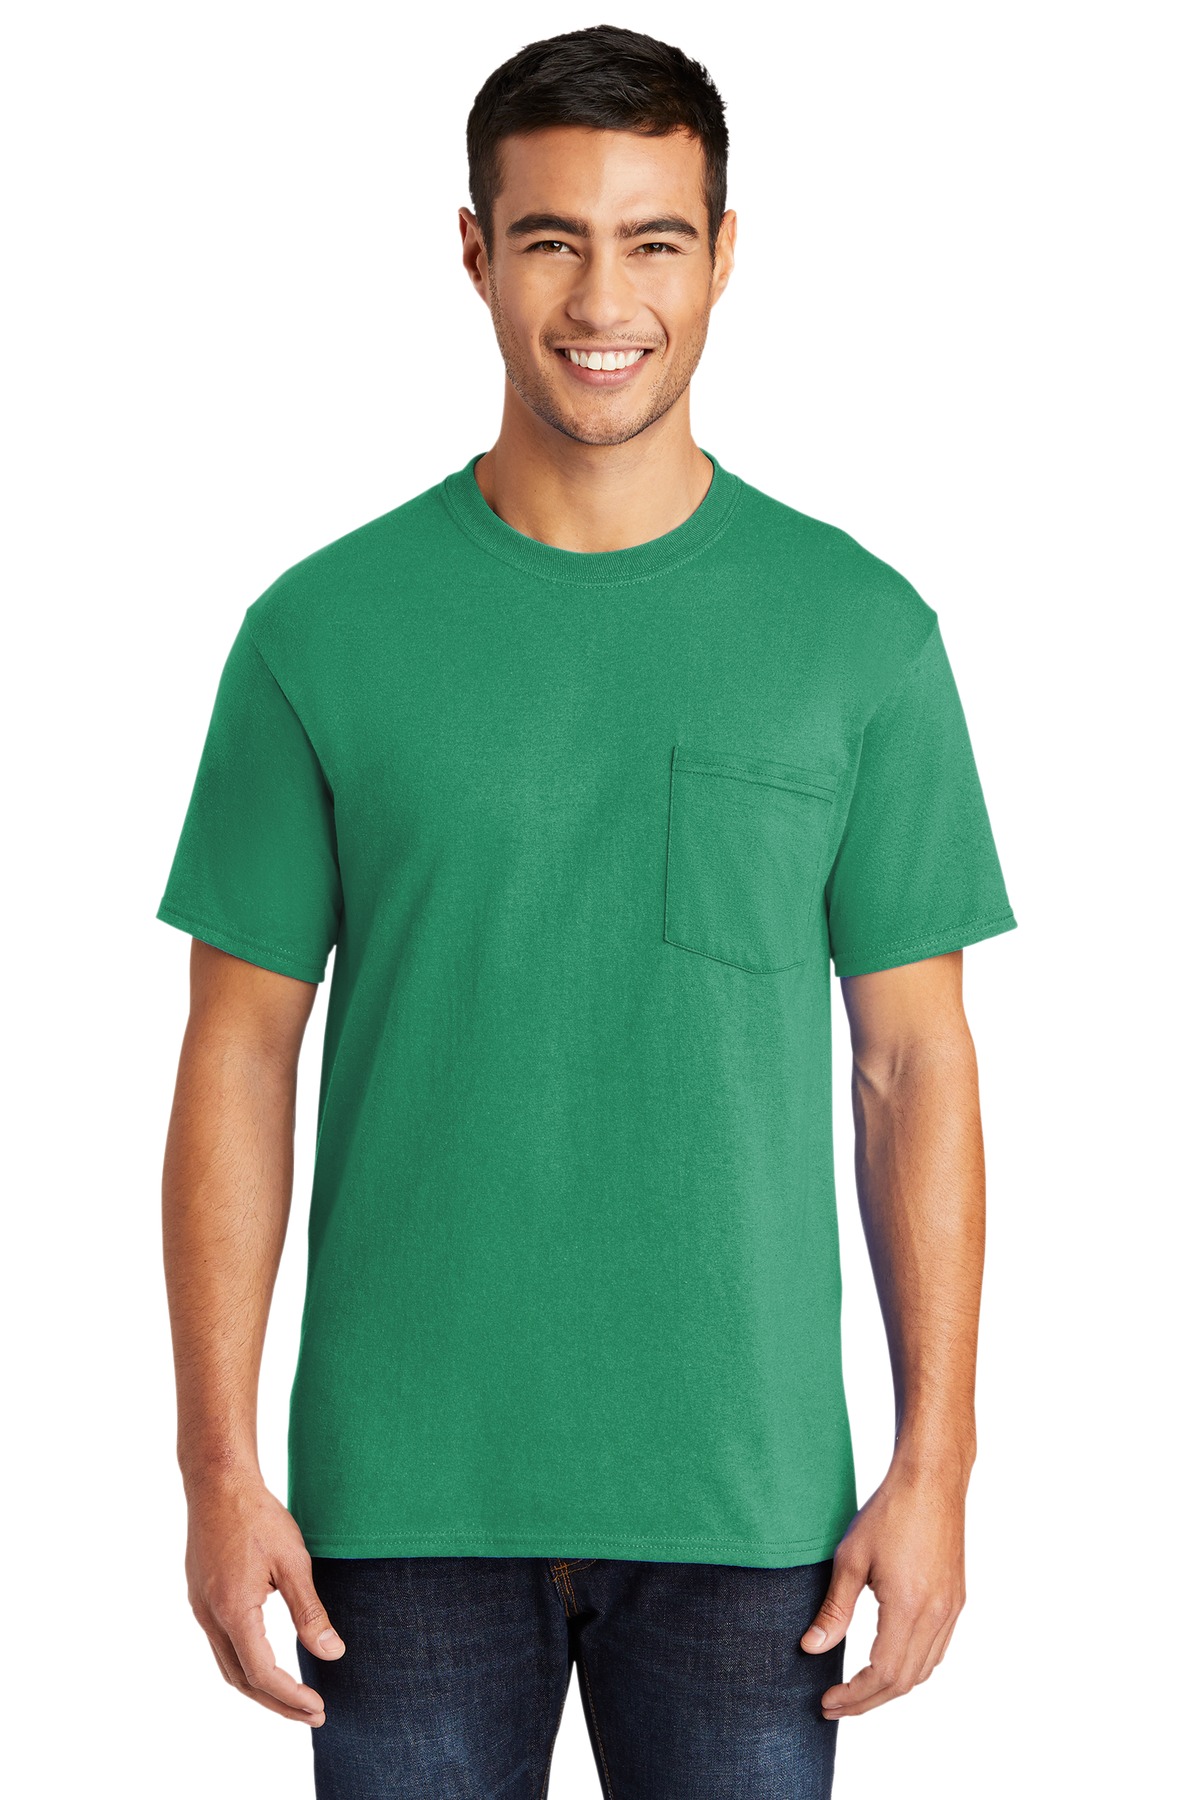 Port & Company Mens 50/50 Cotton/Poly T Shirt with Pocket